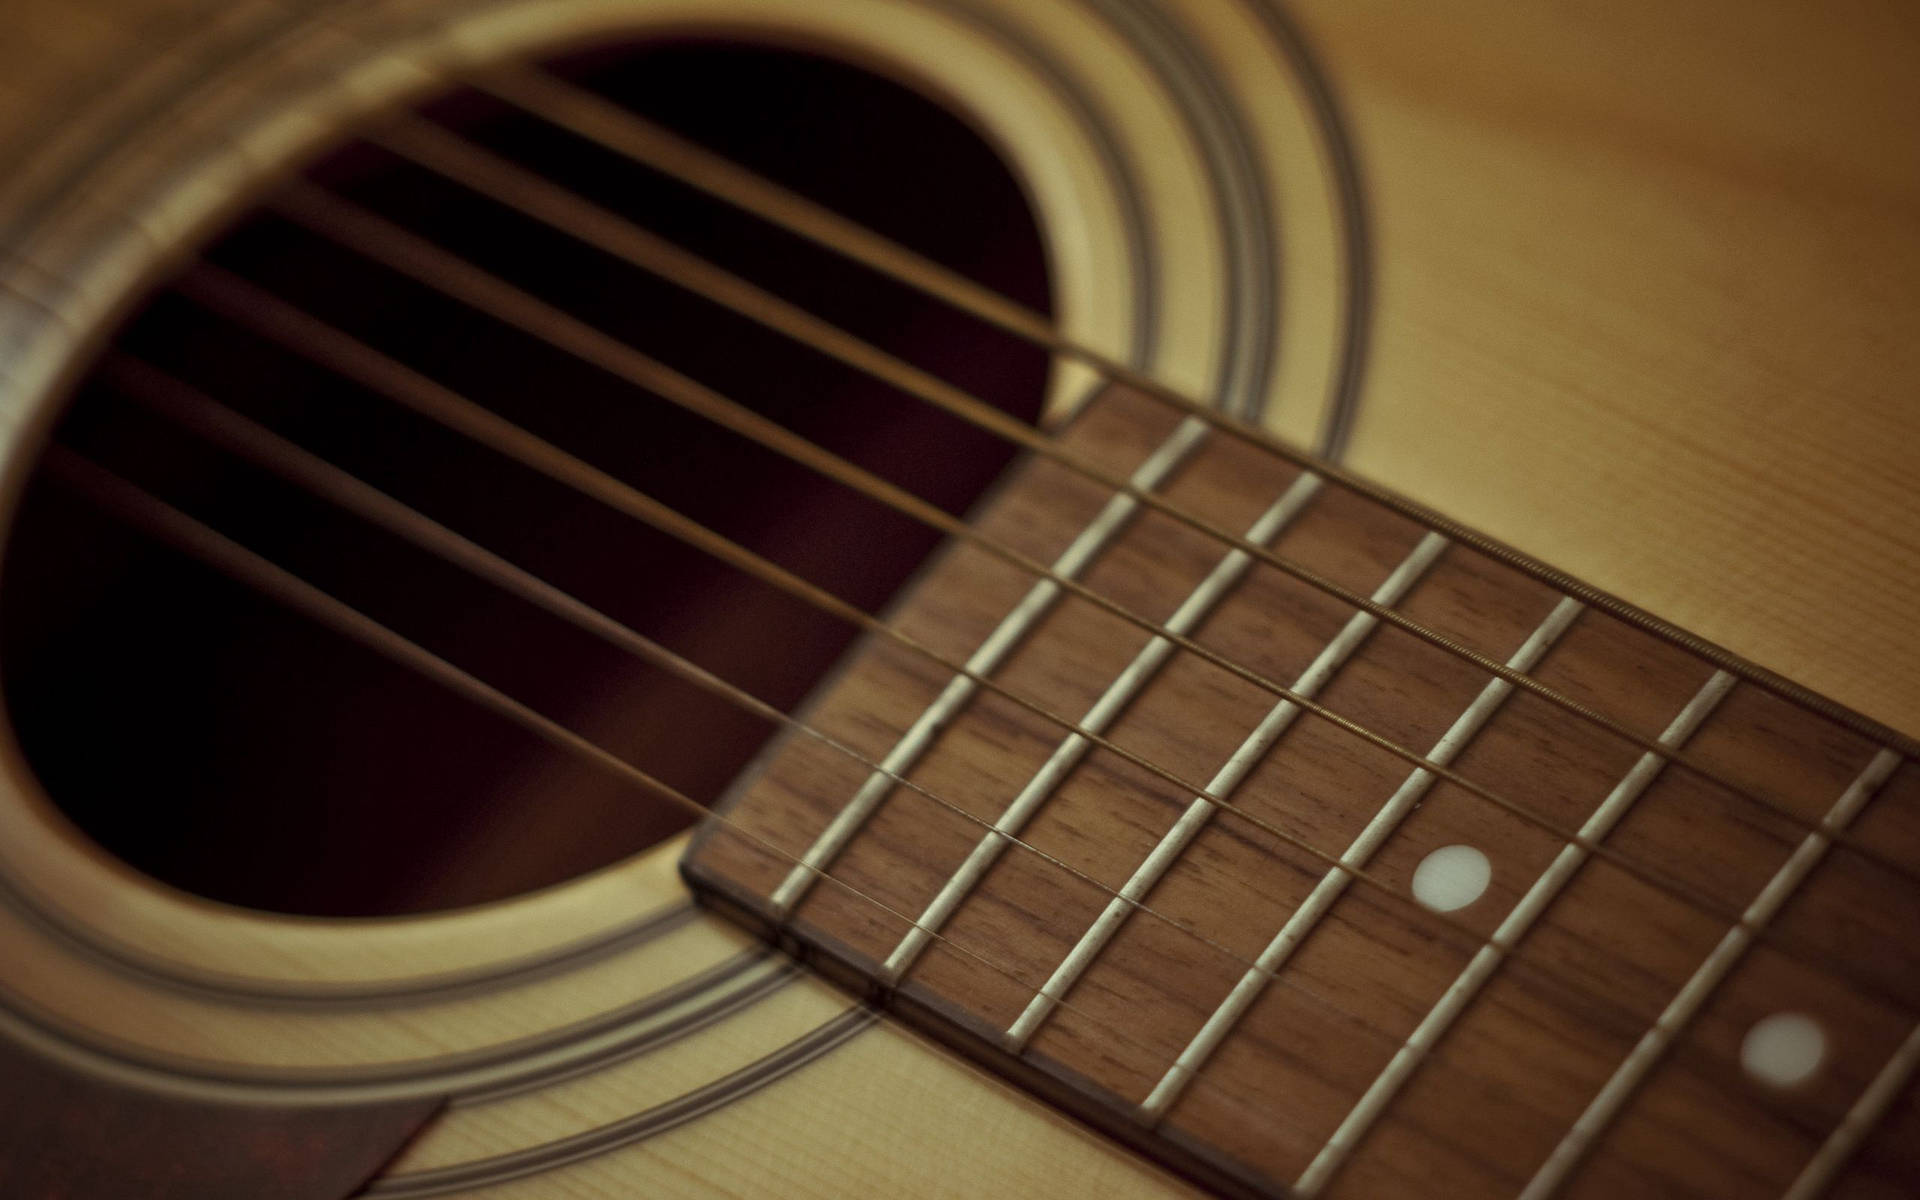 Guitar Strings And Fret Wires Background